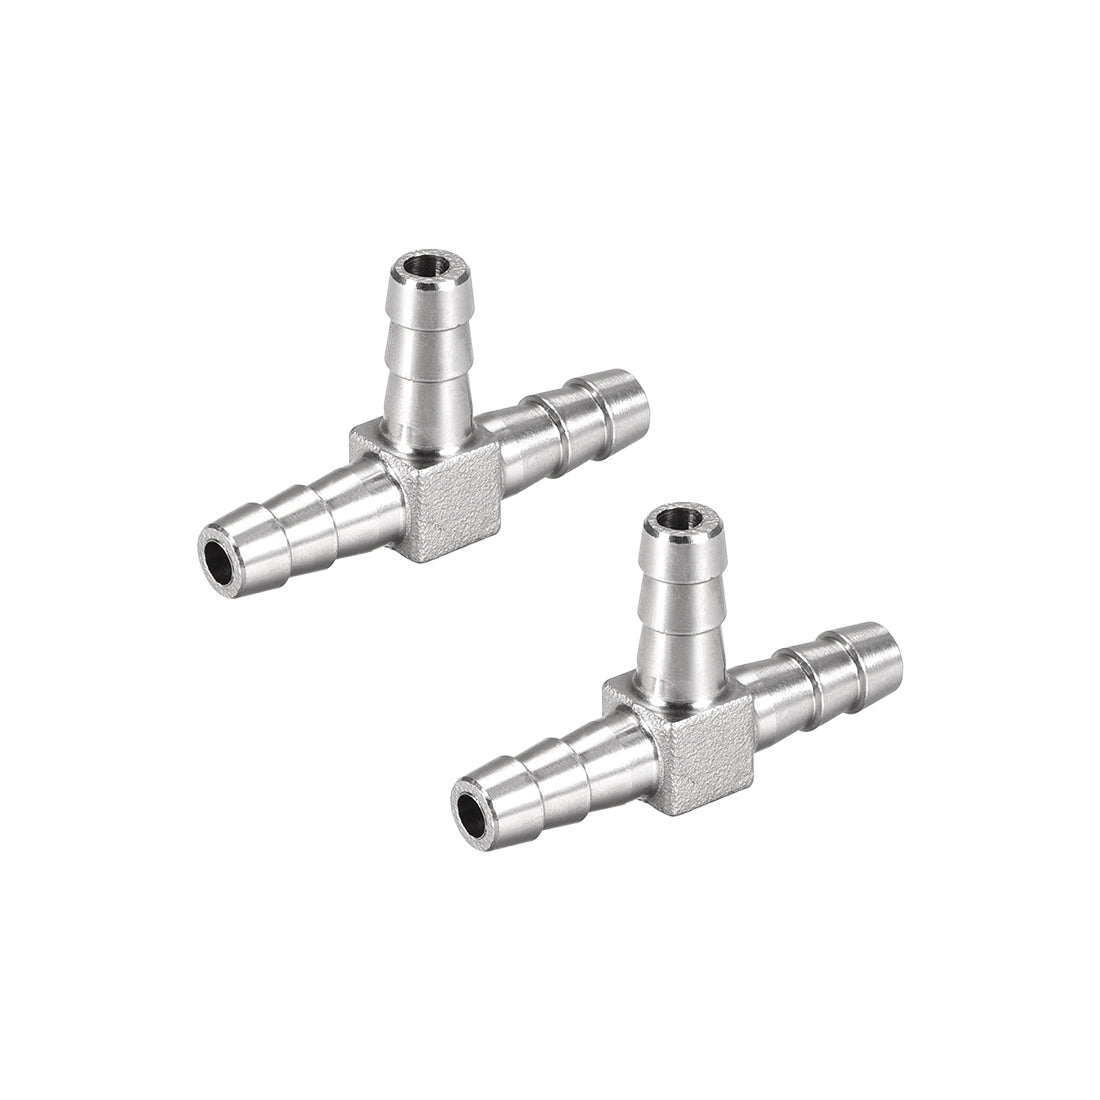 uxcell Uxcell 1/4-Inch (6mm) Hose ID Barb Fitting Stainless Steel 3 Way T Shaped Union Home Brew Fitting 2pcs